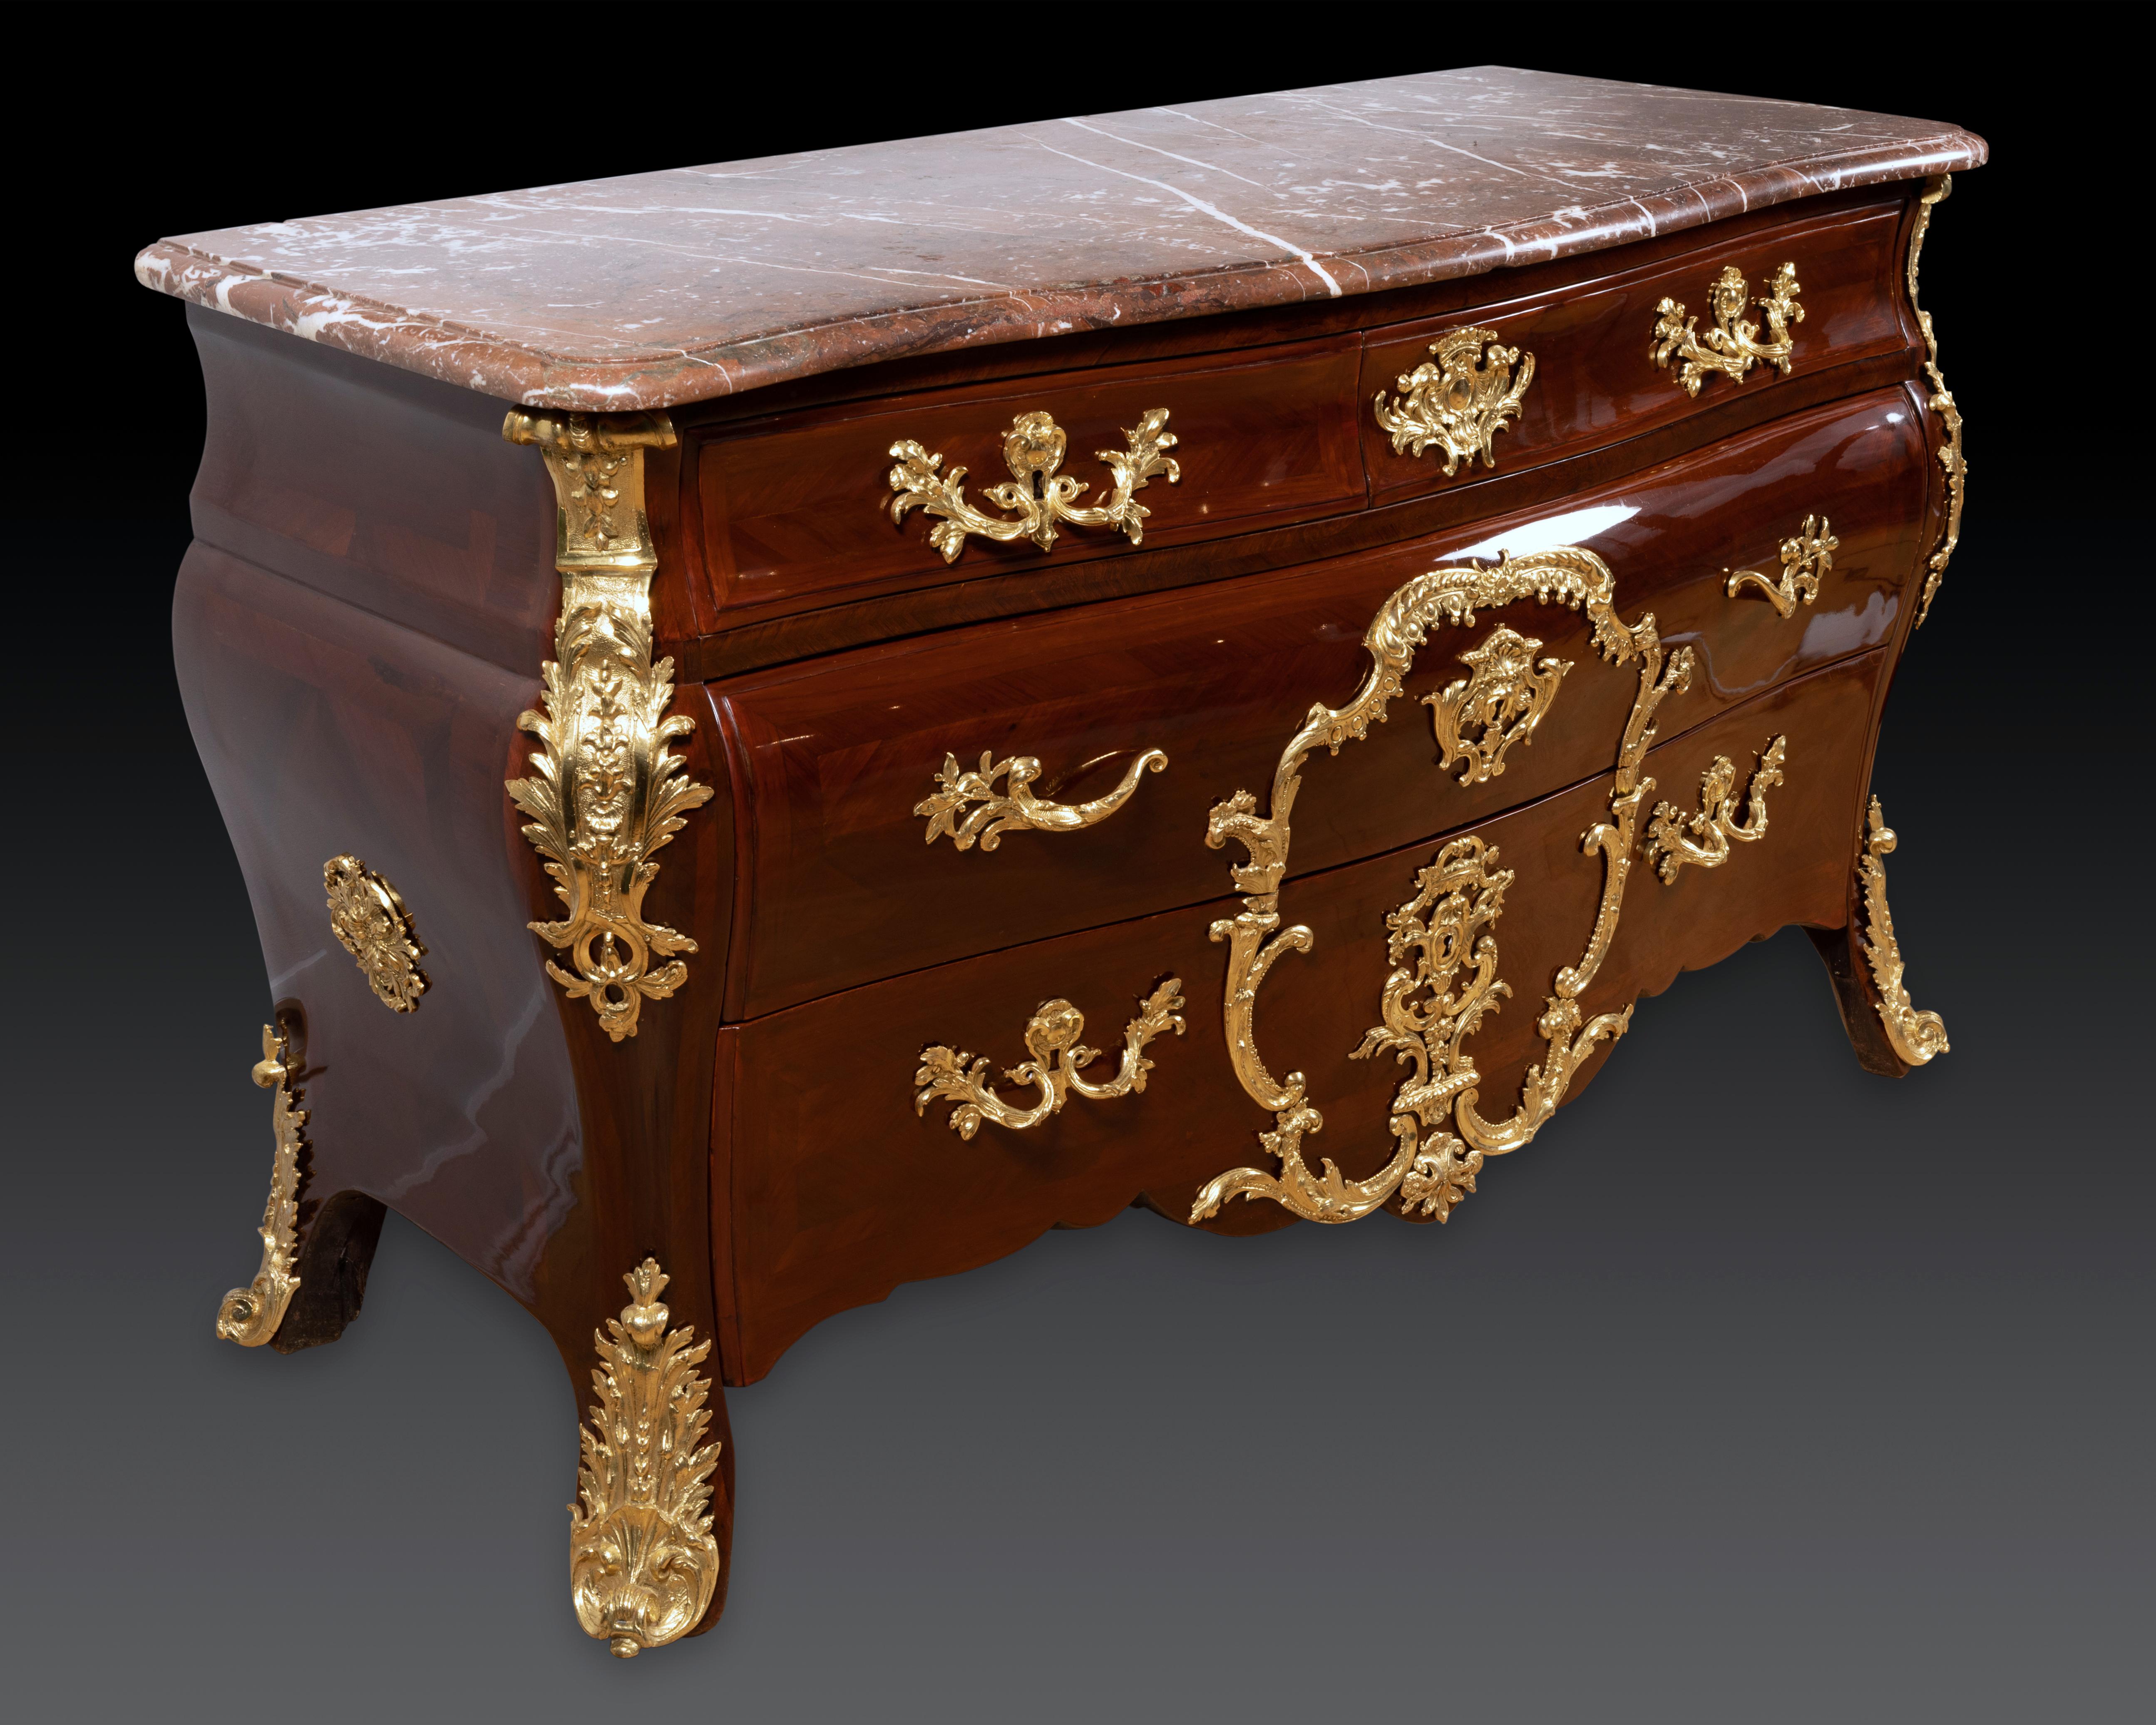 Régence French 18th Century Regence Ormolu-Mounted Commode by Etienne Doirat For Sale